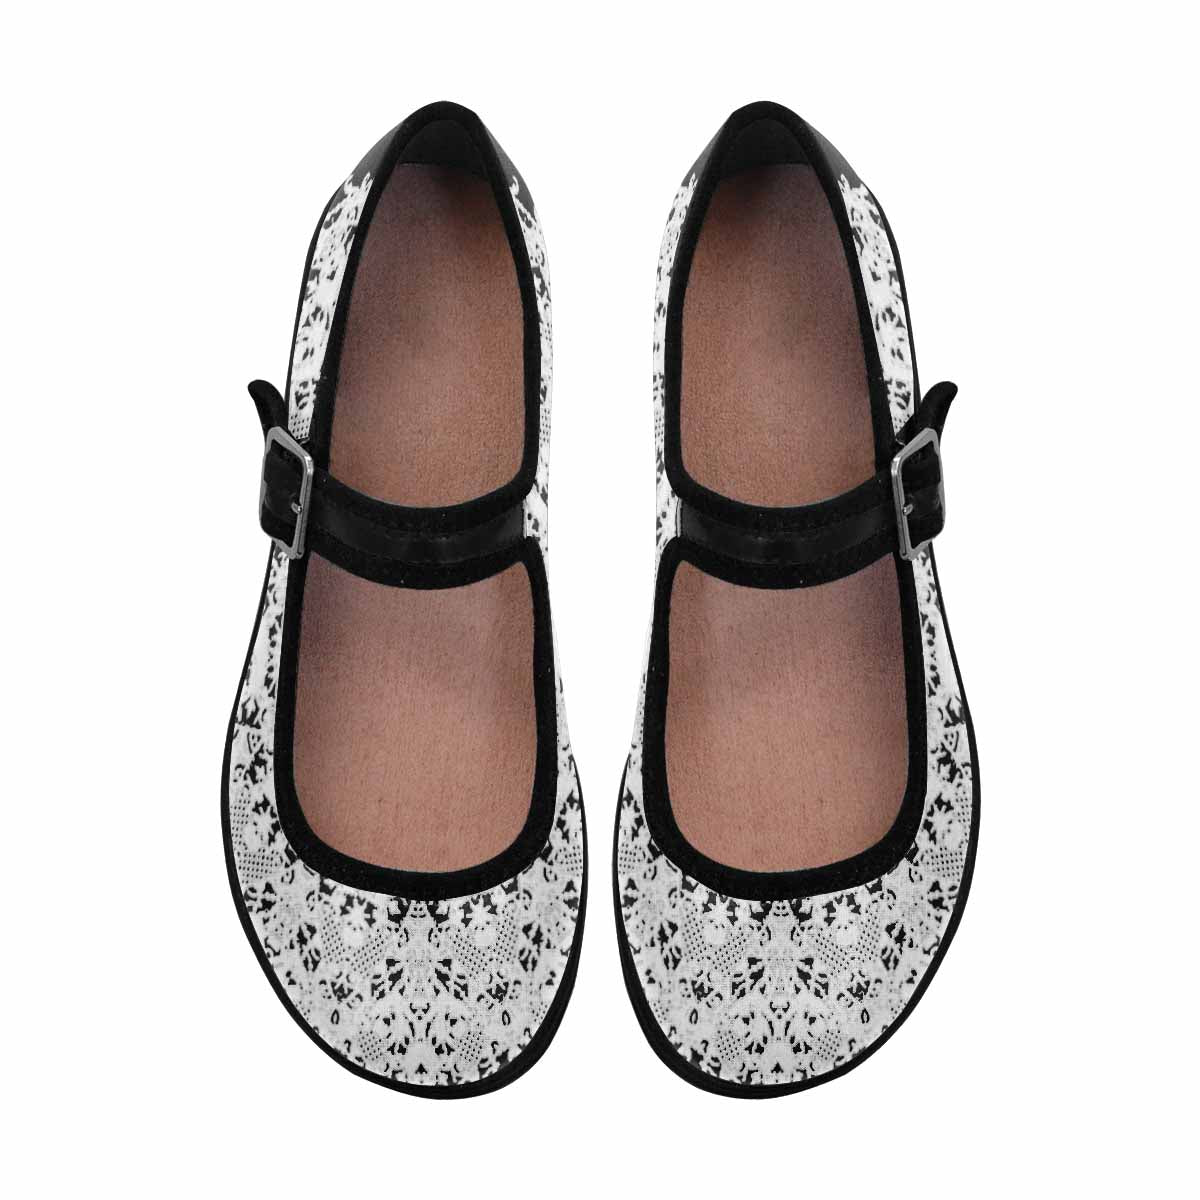 Victorian lace print, cute, vintage style women's Mary Jane shoes, design 50